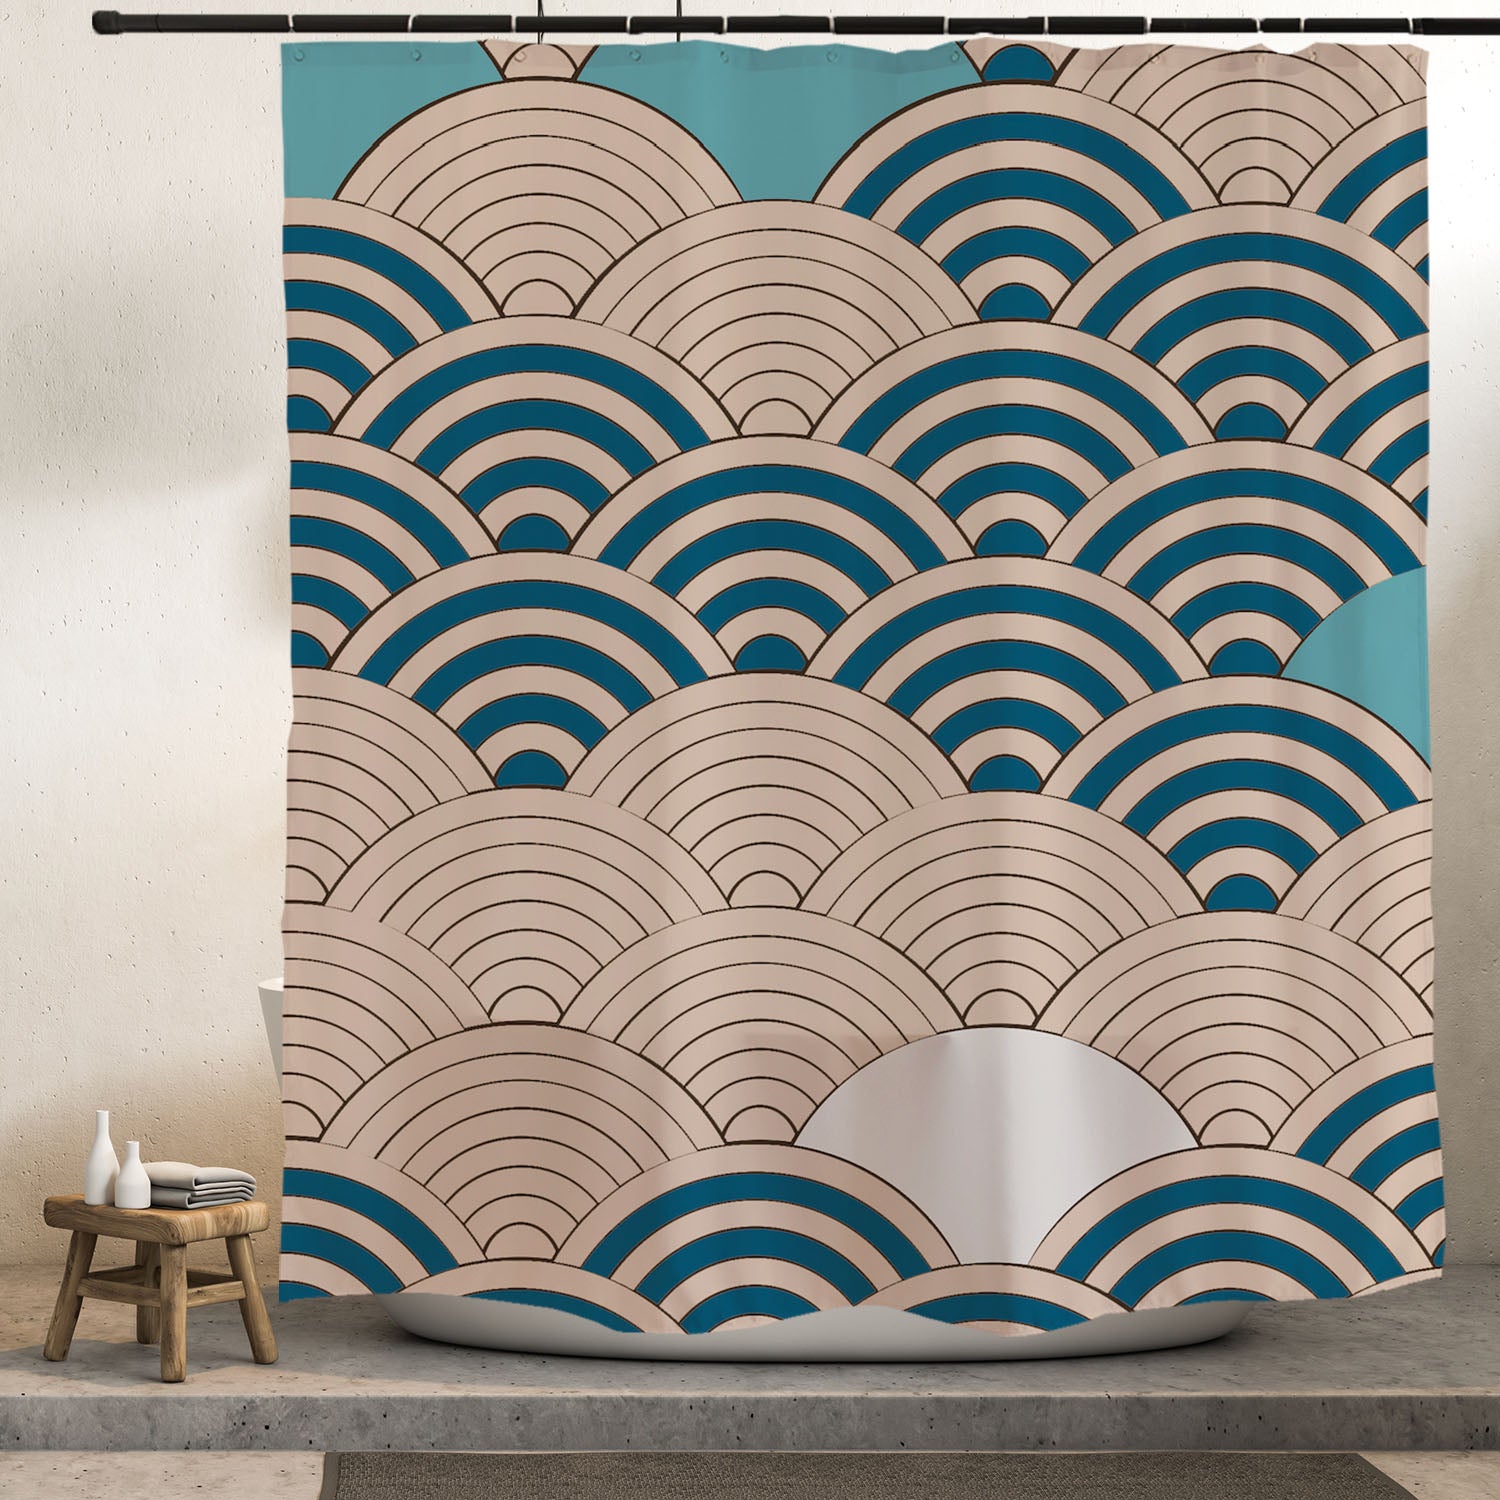 Feblilac Yellow and Blue Waves Shower Curtain with Hooks